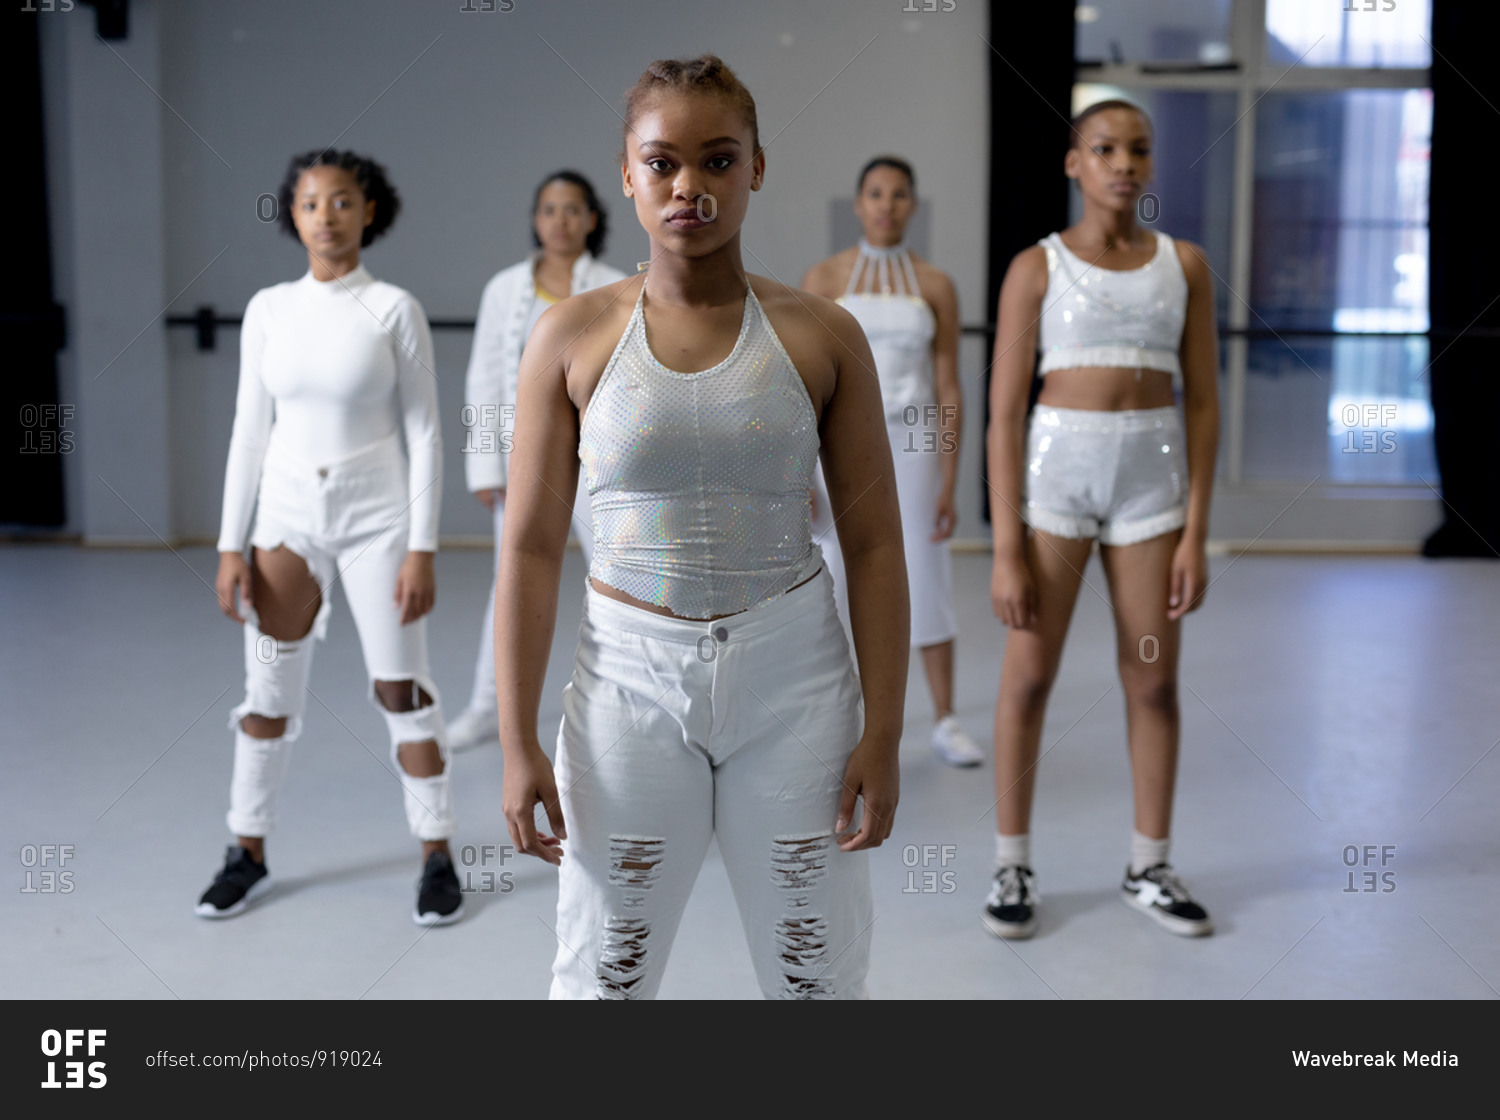 Front view of a multi-ethnic group of fit female modern dancers wearing white outfits practicing a dance routine during a dance class in a bright studio, standing on the floor and looking straight into a camera.